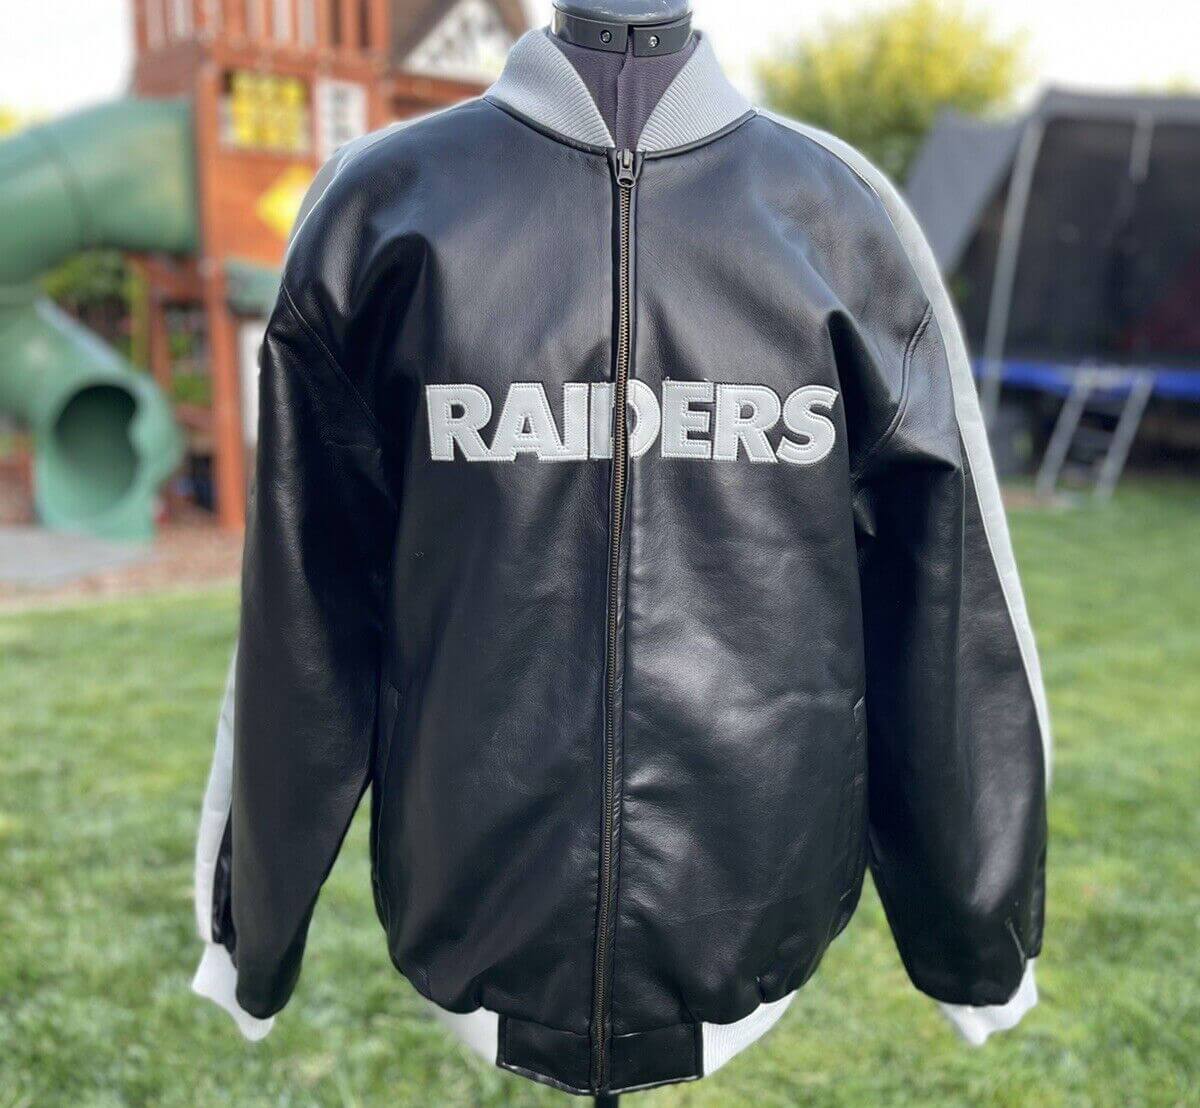 Vintage Starter NFL Raiders Pro Palyer Jacket 1990s Size XL Made in USA